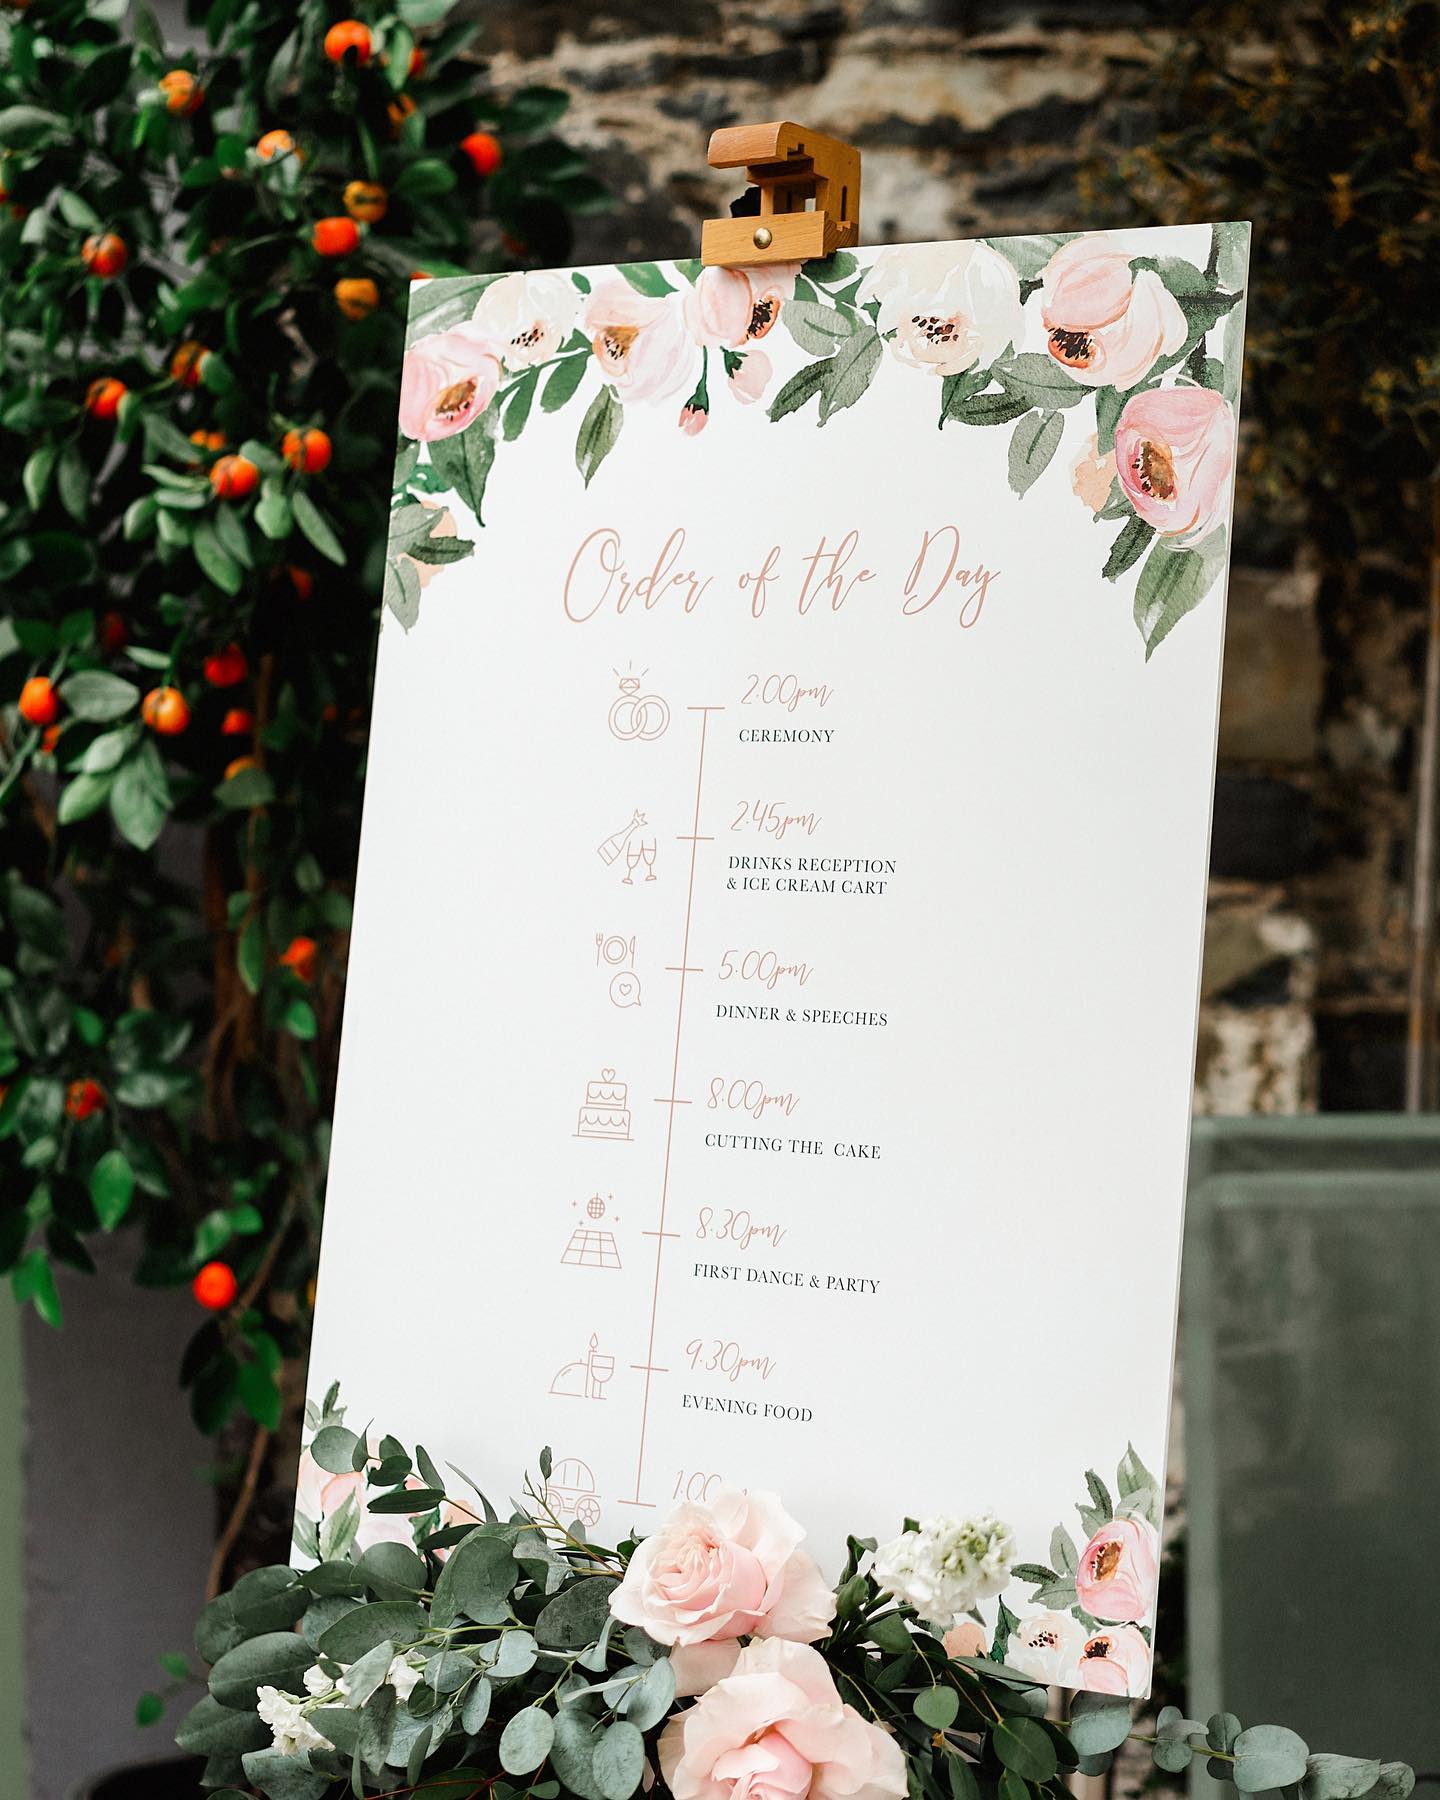 This wedding welcome sign highlights the order of the day from the time of the ceremony to closing time. Pink flowers and green foliage can be seen at the bottom of the sign and complements the drawn roses and foliage at the top of the sign.